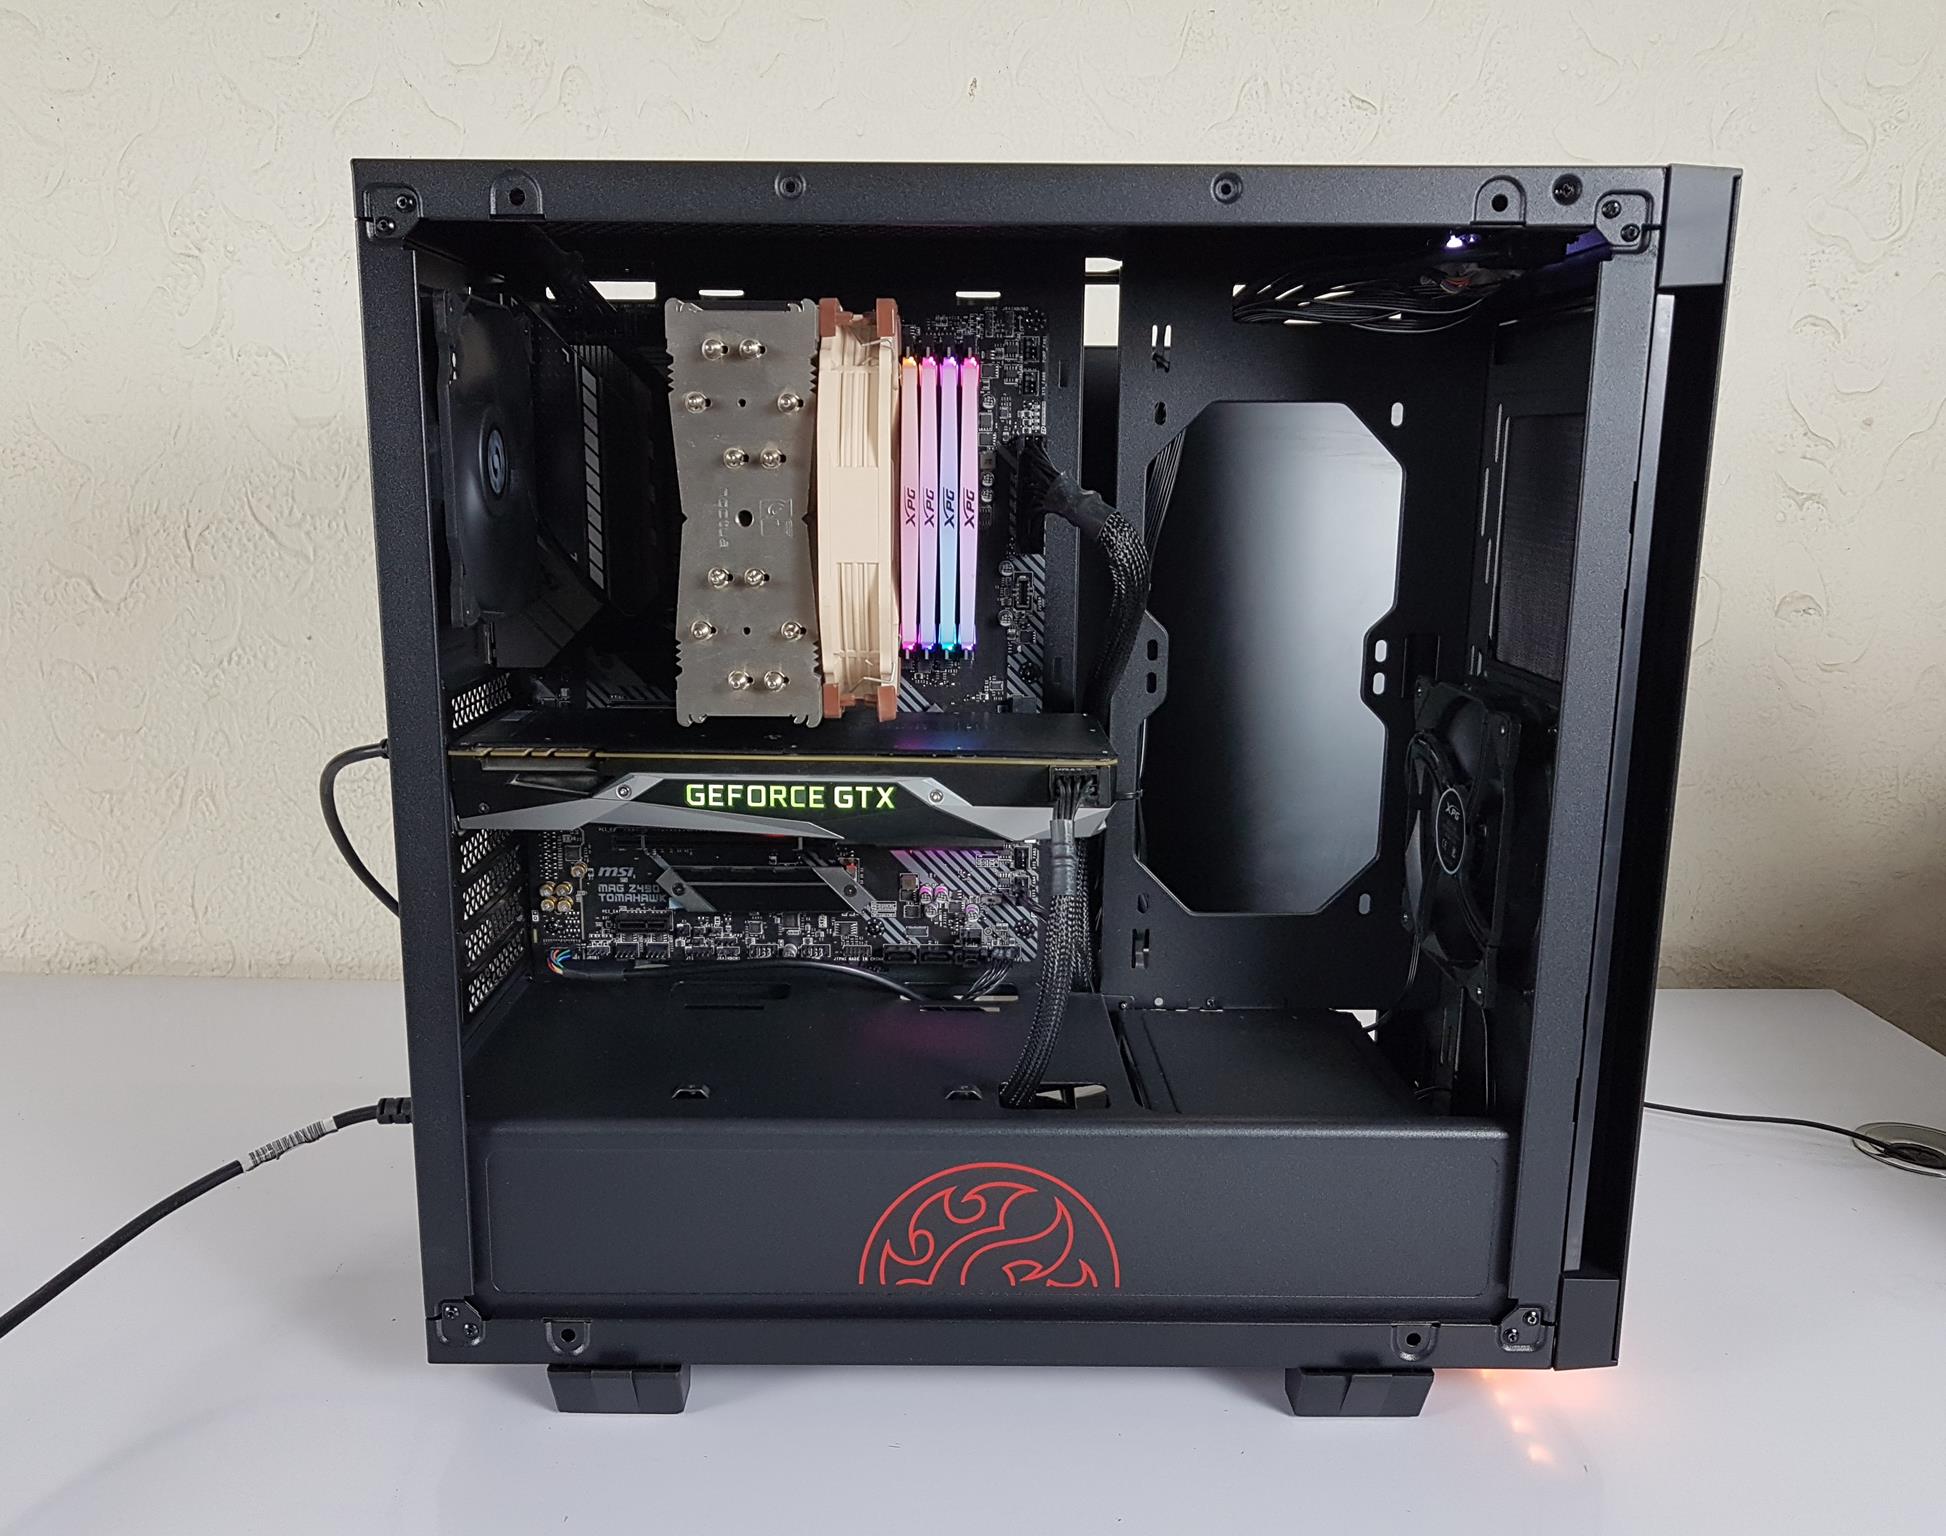 xpg case Test Build and Experience tight fit